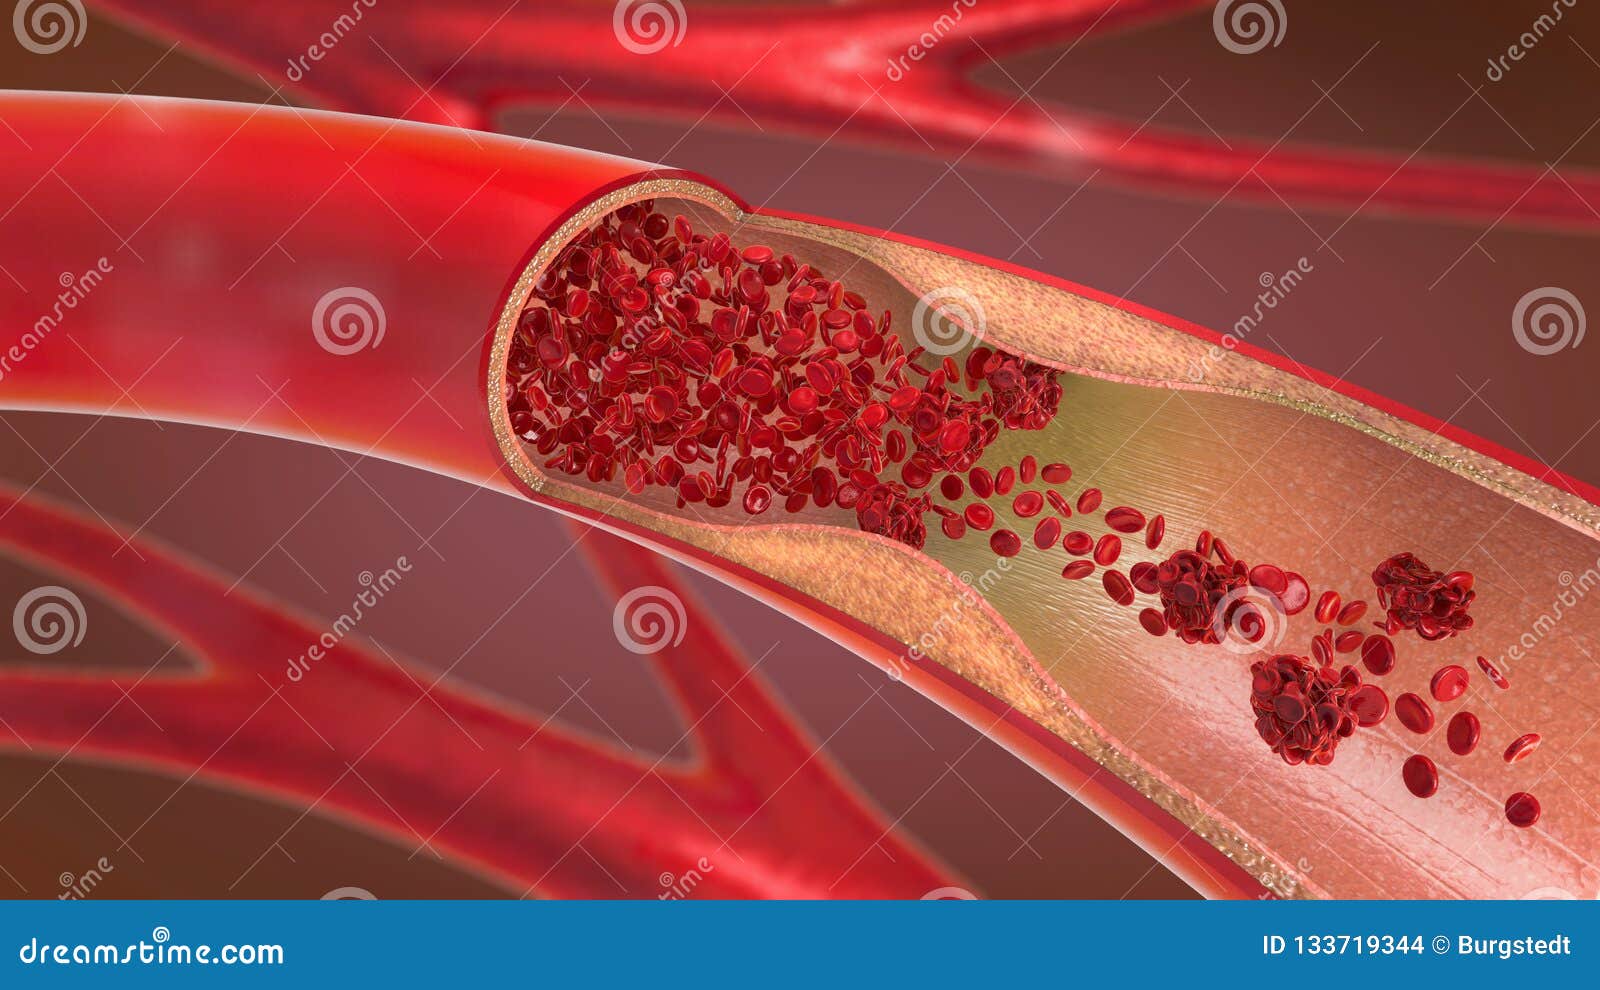 constricted and narrowed artery and the blood cannot flow properly called arteriosclerosis